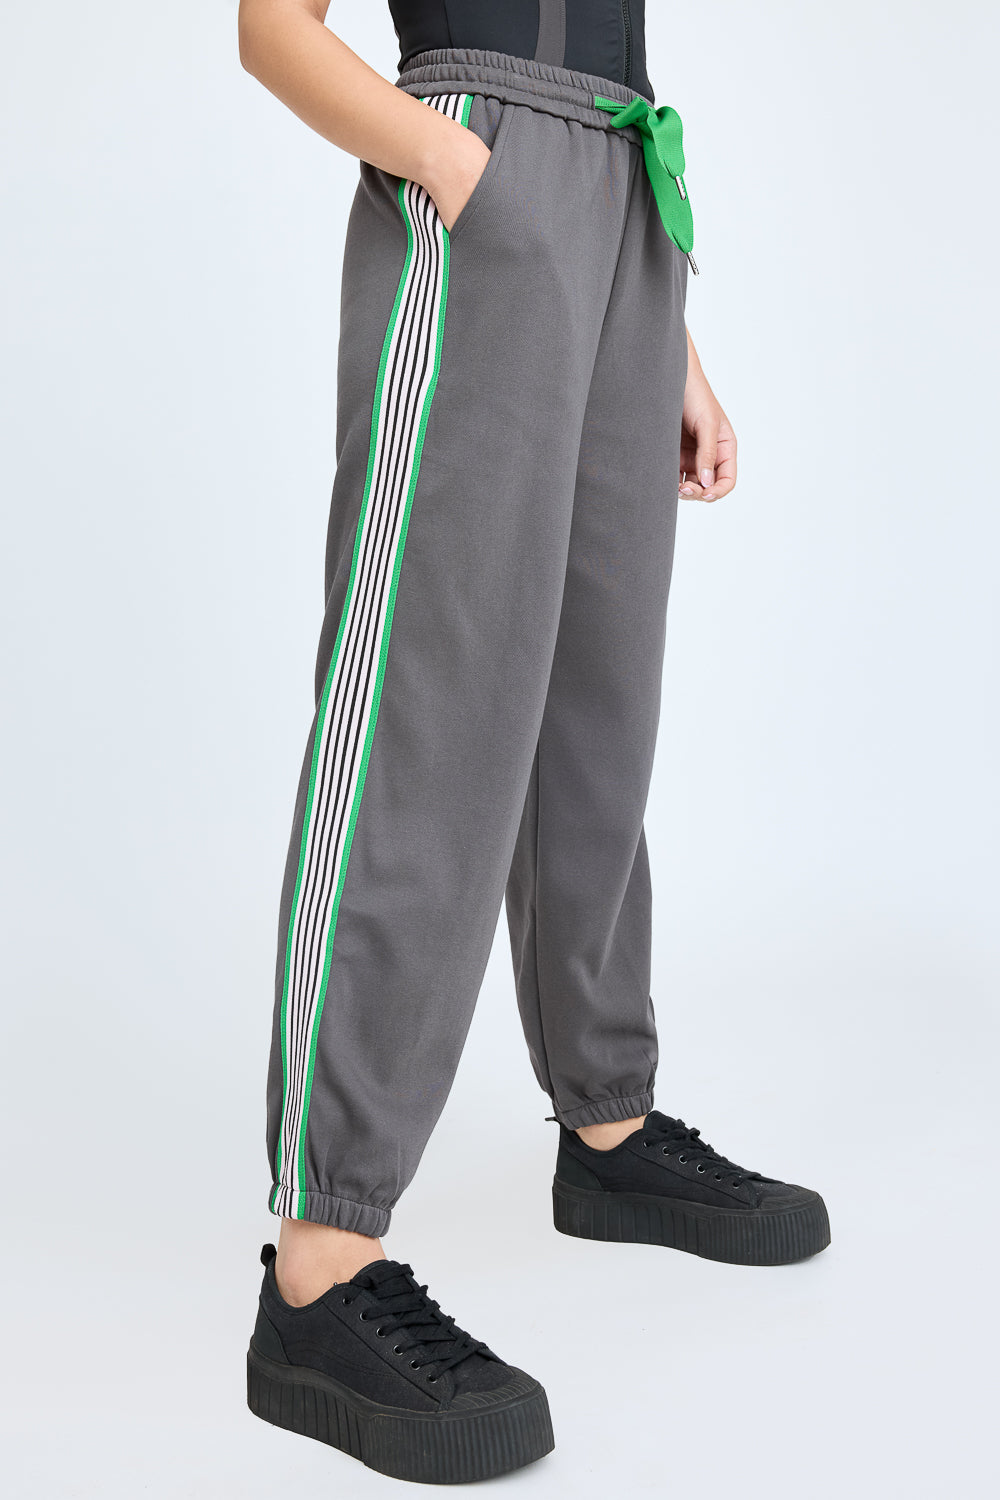 SIDE-STRIPED GREY JOGGERS